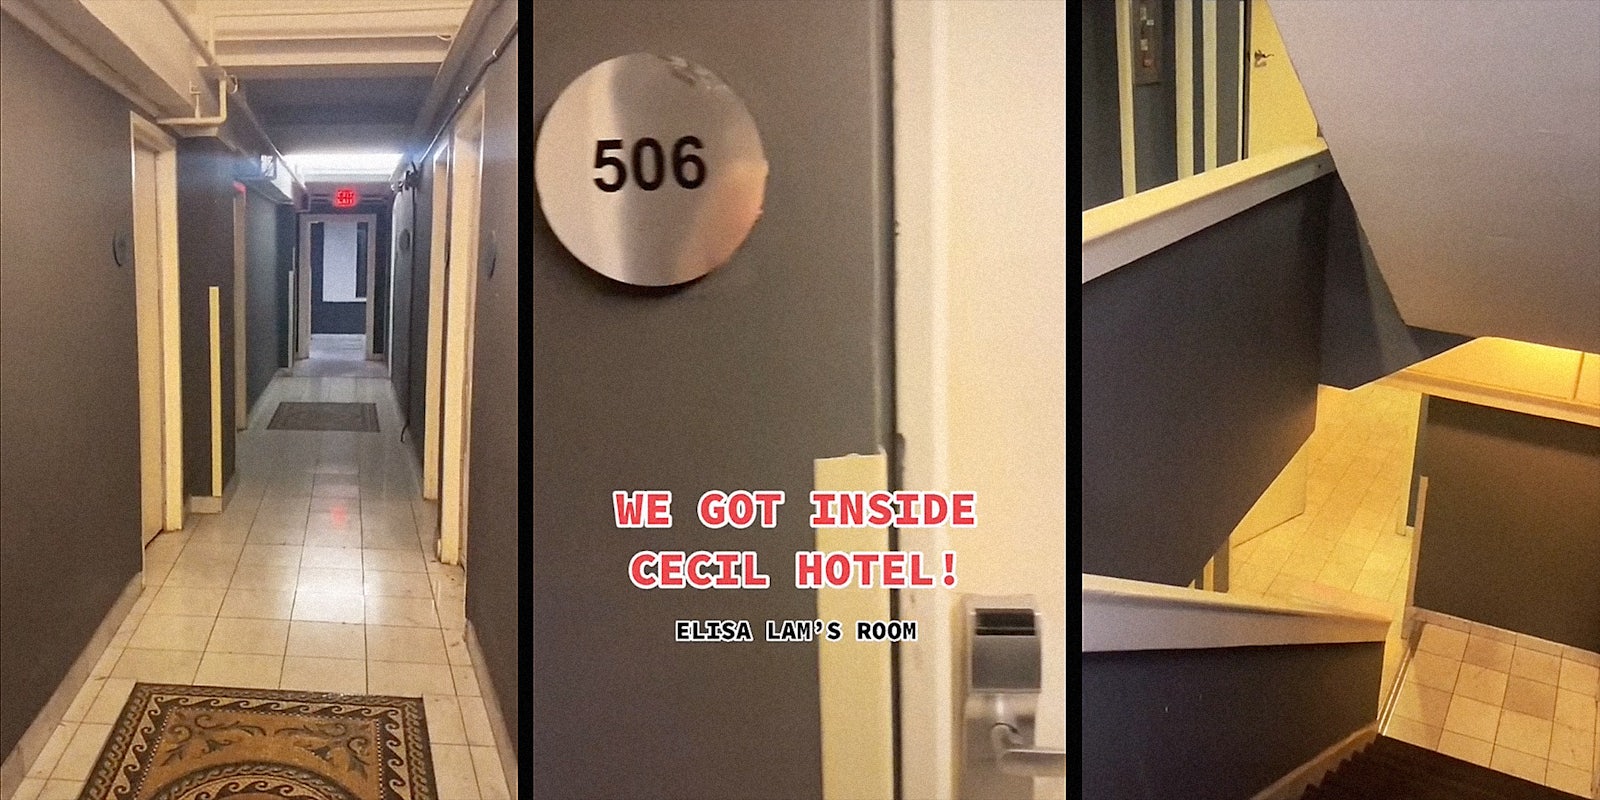 hotel hallway (l) hotel room 506 with 'we got inside cecil hotel! elisa lam's room' (c) stairwell (r)